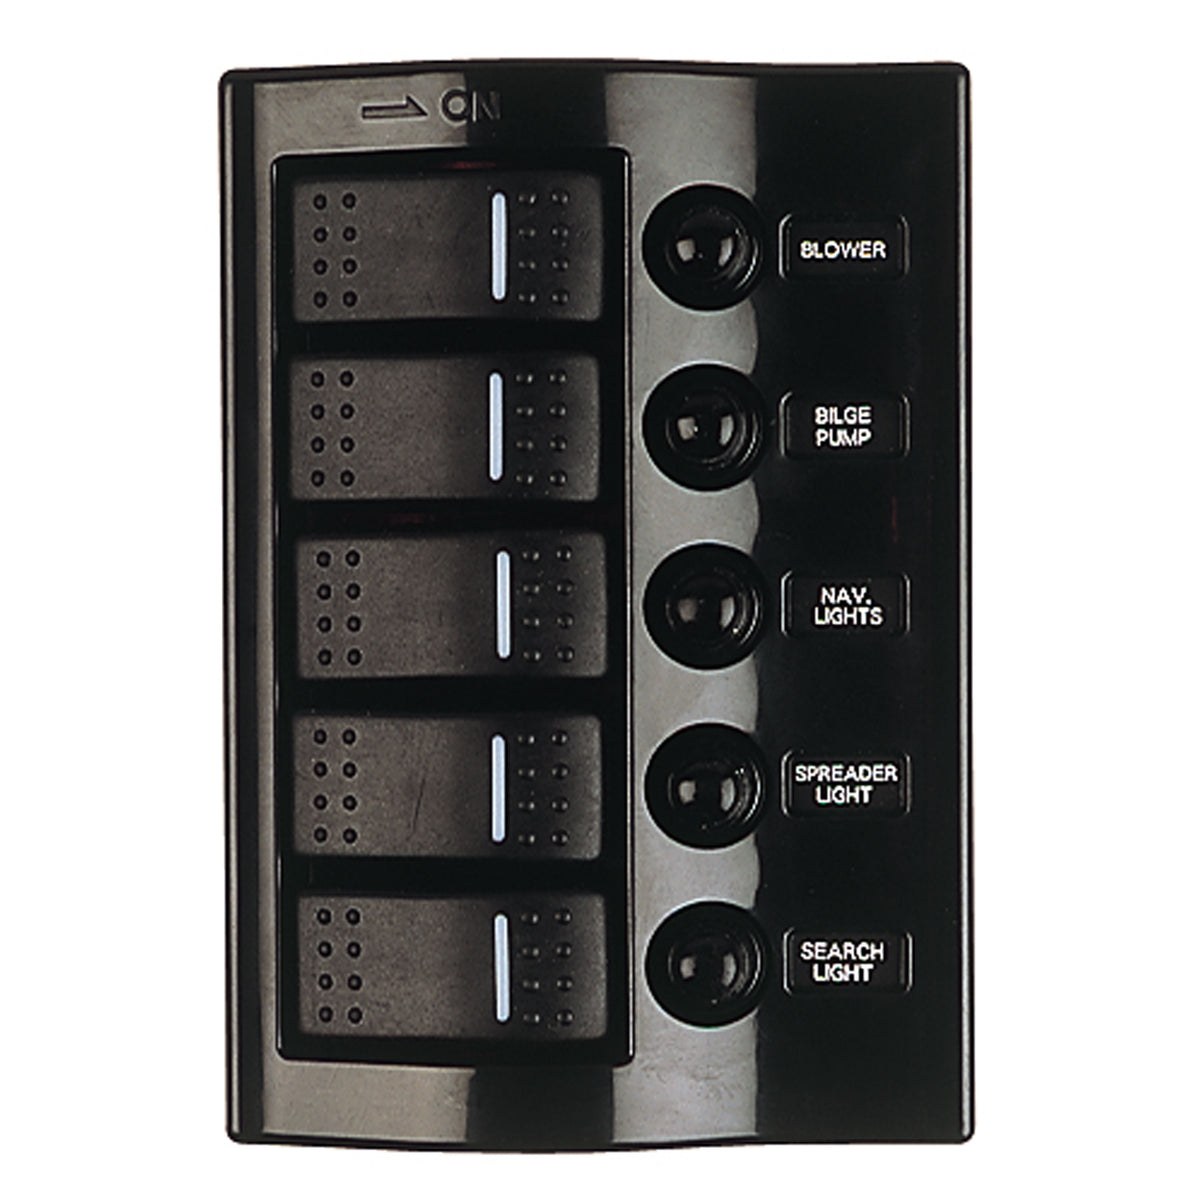 Sea-Dog 425800-1 Wave Rocker Switch Breaker Panel with 5 Switches